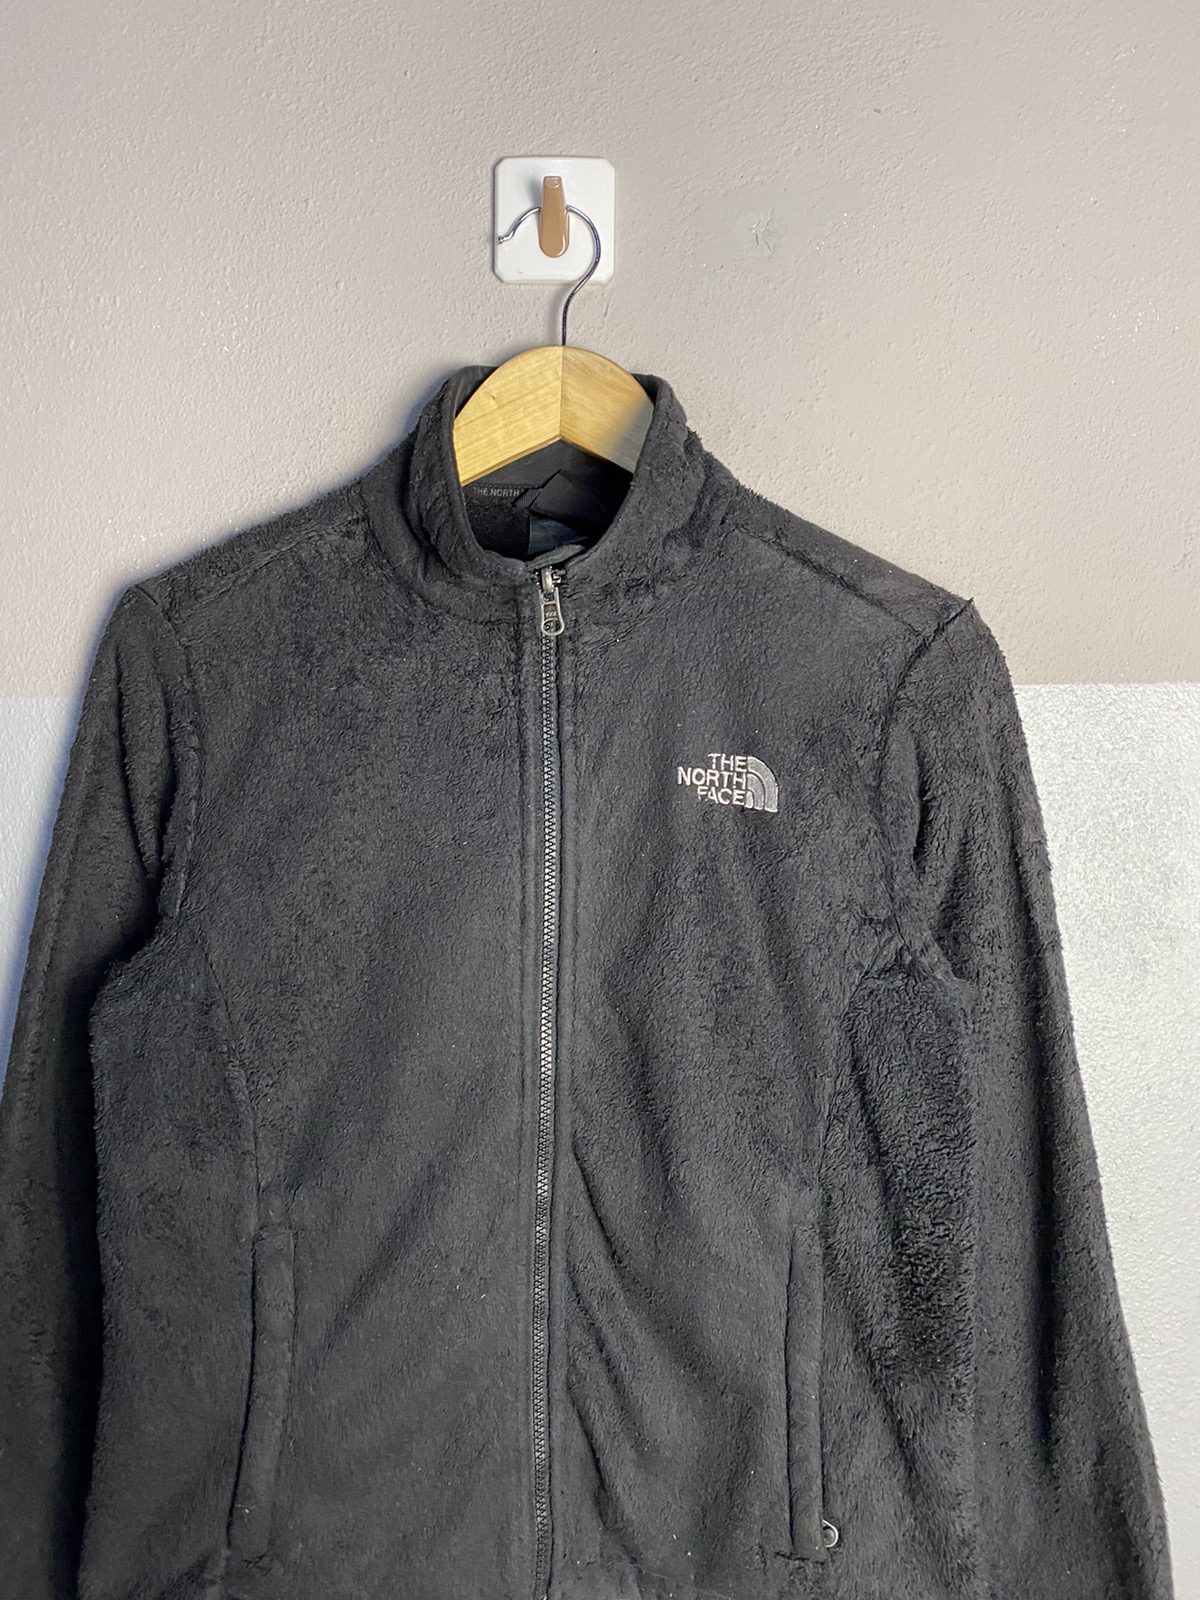 🔥SALE🔥THE NORTH FACE SHERLING FLEECE JACKET - 5